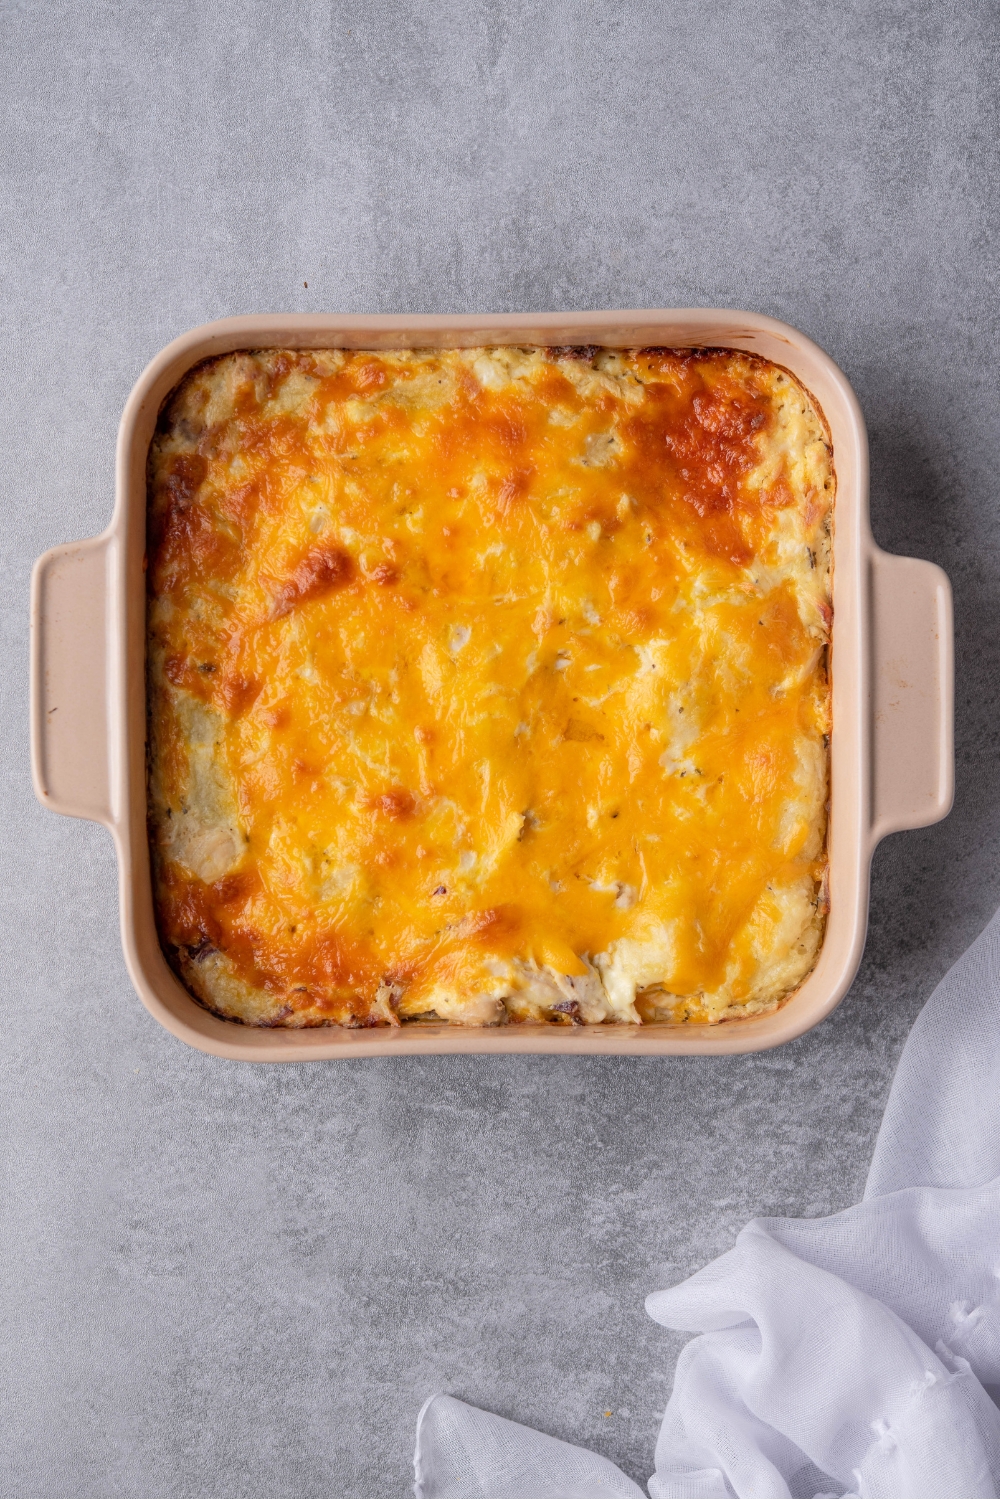 Melted shredded cheddar cheese on top of a casserole and a square casserole dish and a gray counter.